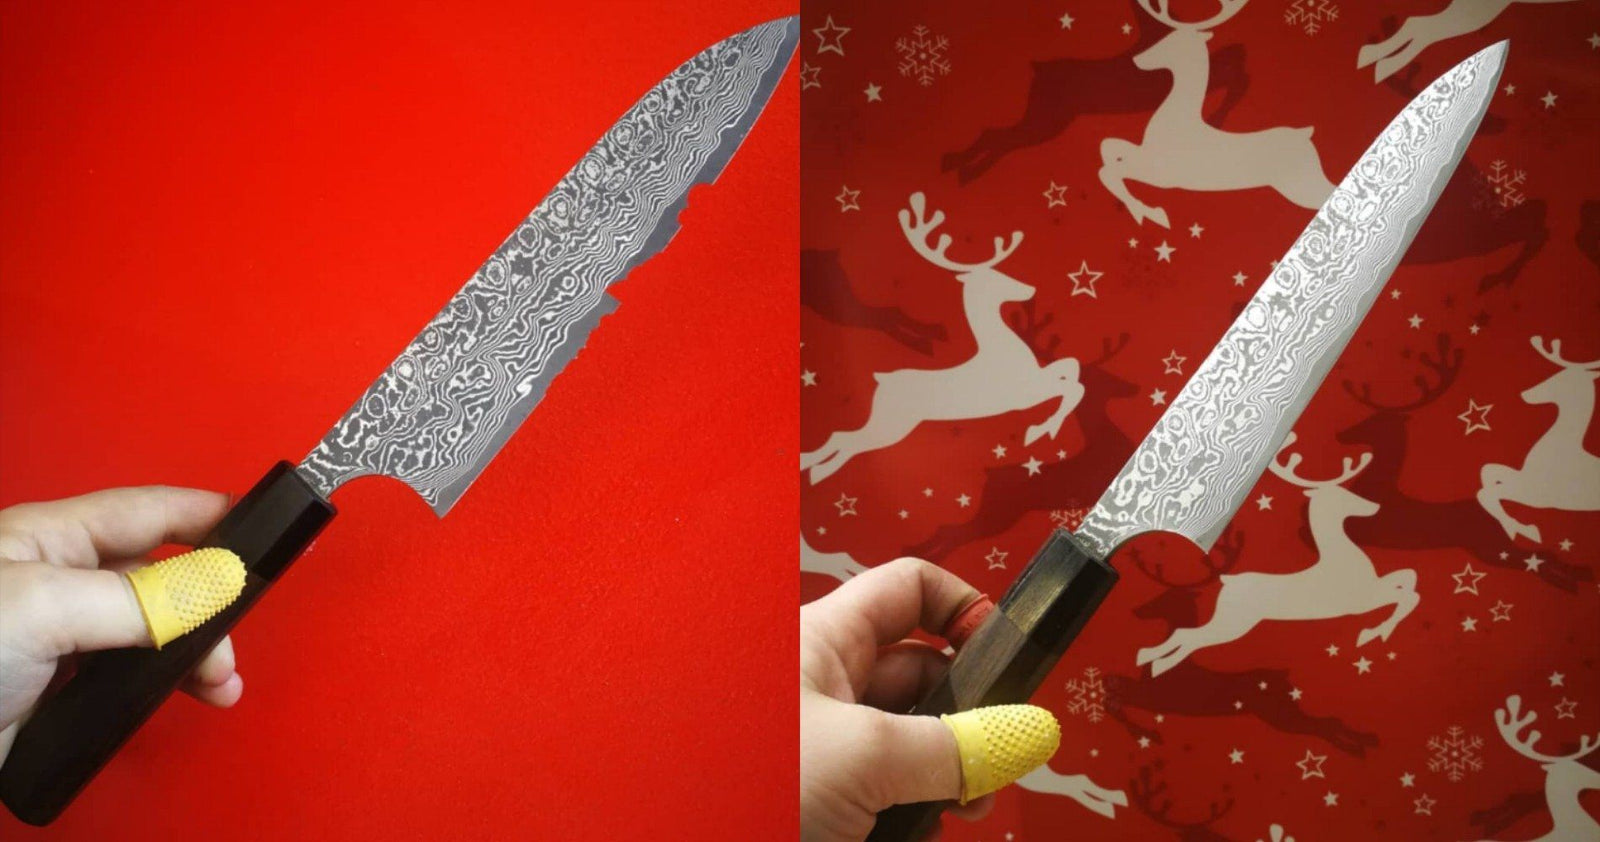 Yes, You Can Sharpen Ceramic Blade Knives: Here's How You Do It